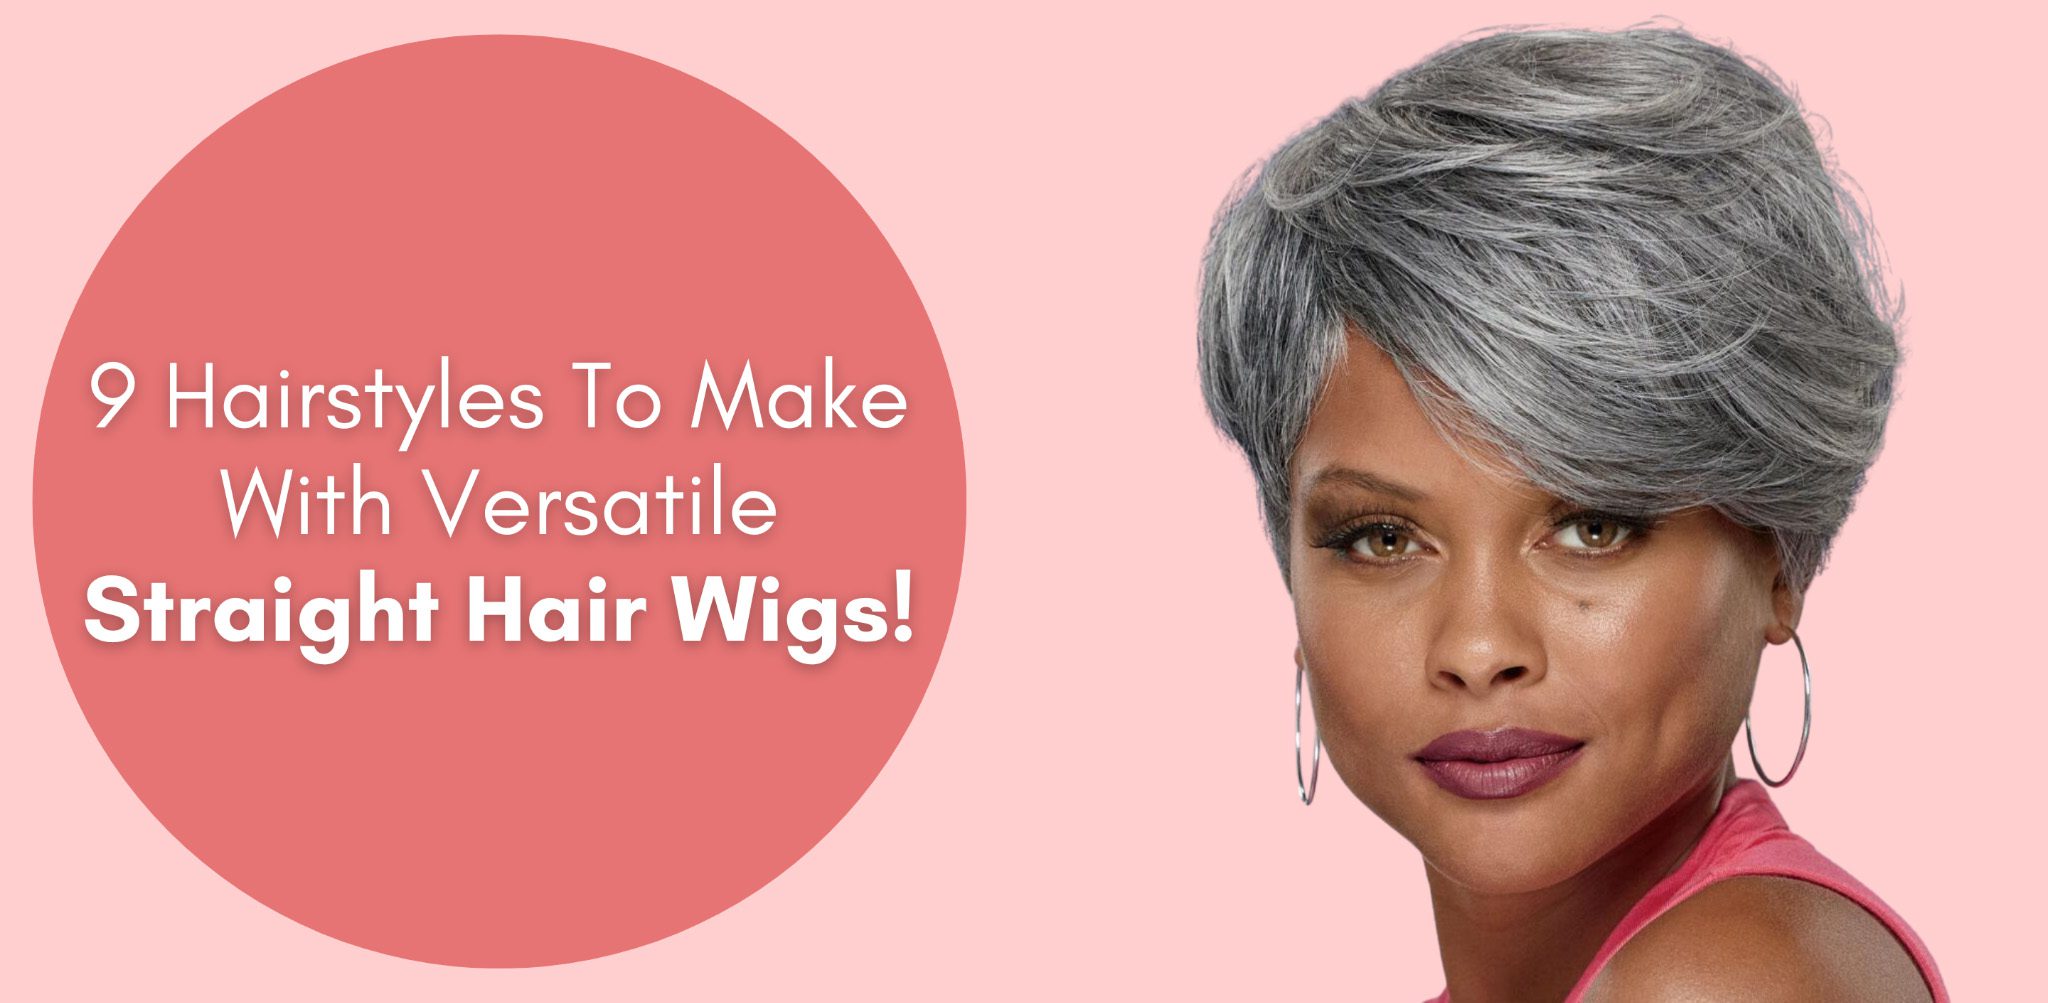 9 Hairstyles To Make With Versatile Straight Hair Wigs!